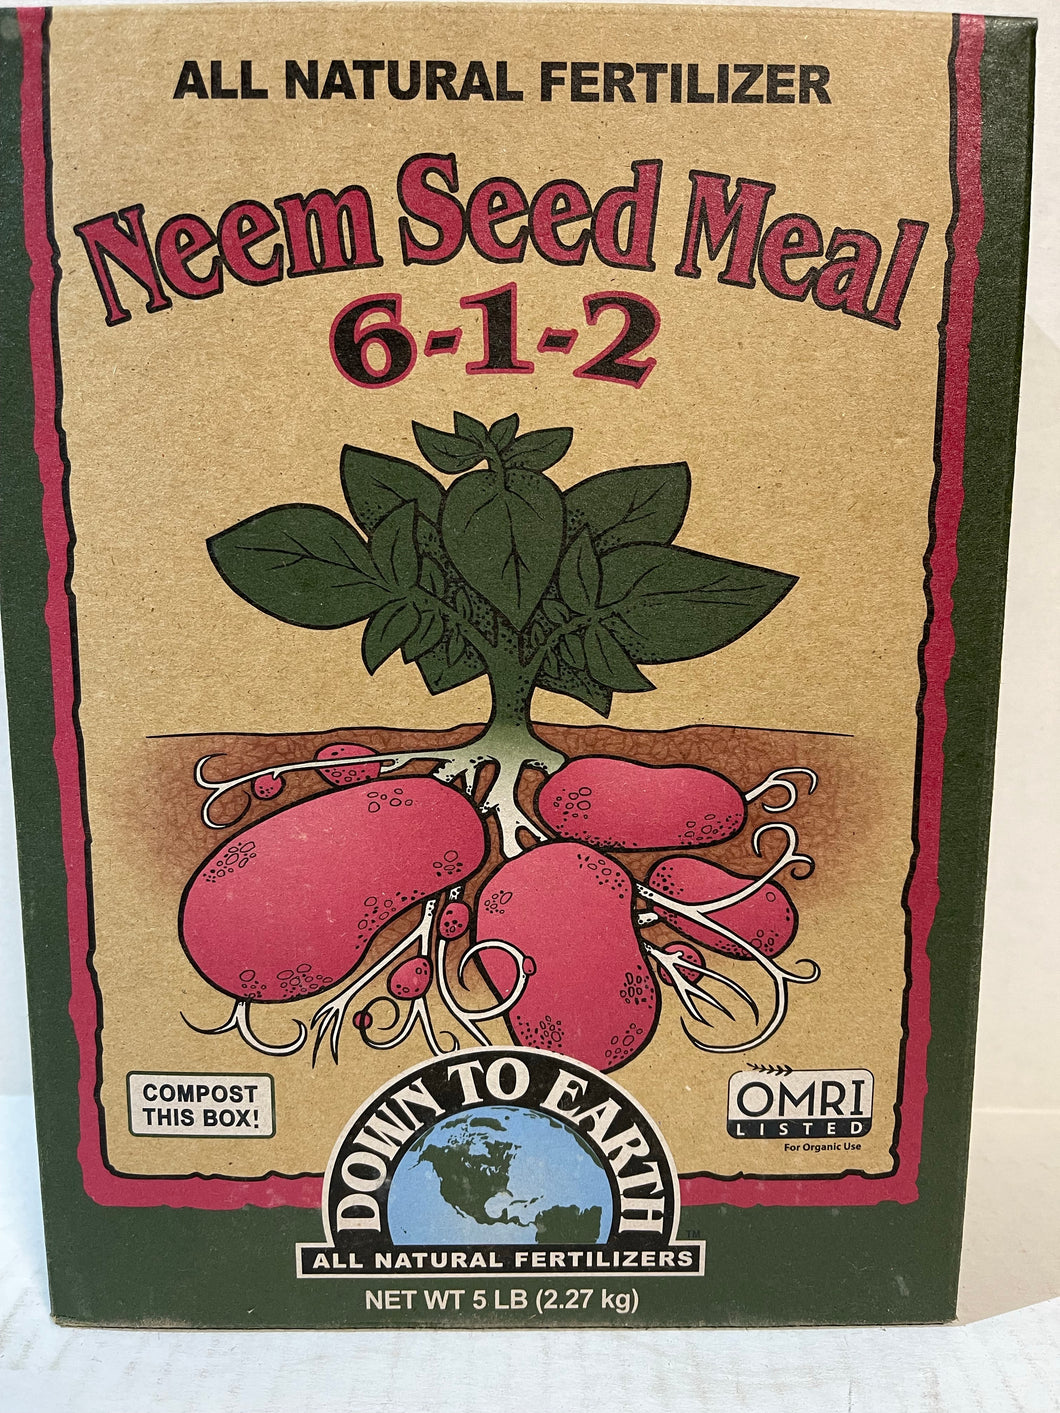 Down To Earth Neem Seed Meal 6-1-2